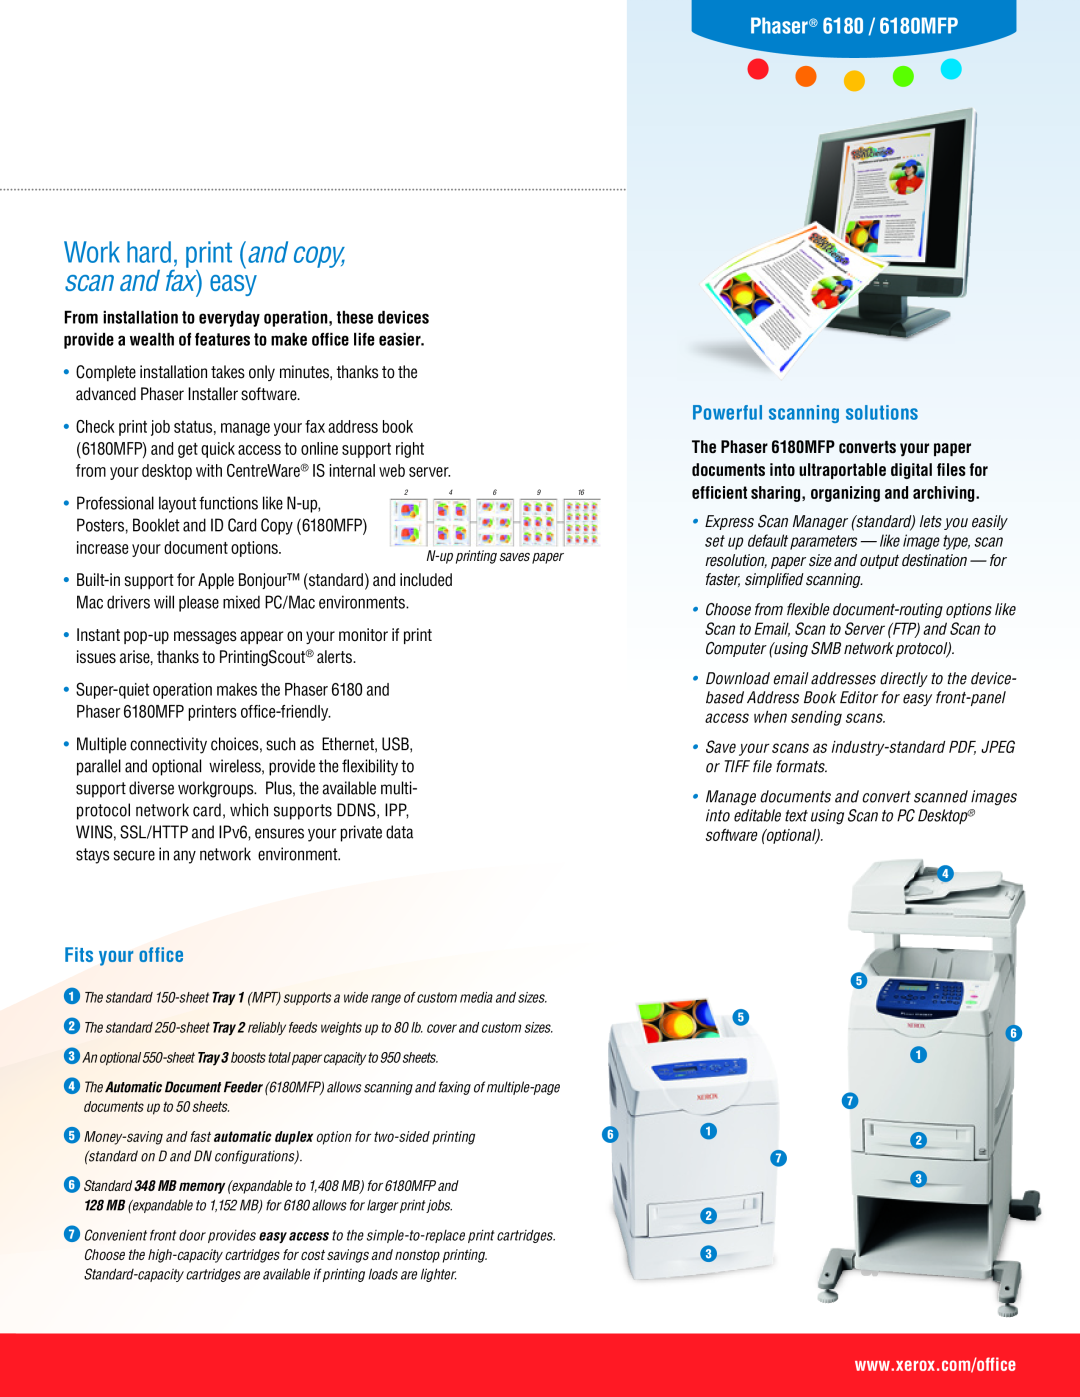 Xerox 6180 efficient sharing, organizing and archiving, Work hard, print and copy, scan and fax easy, Fits your office 